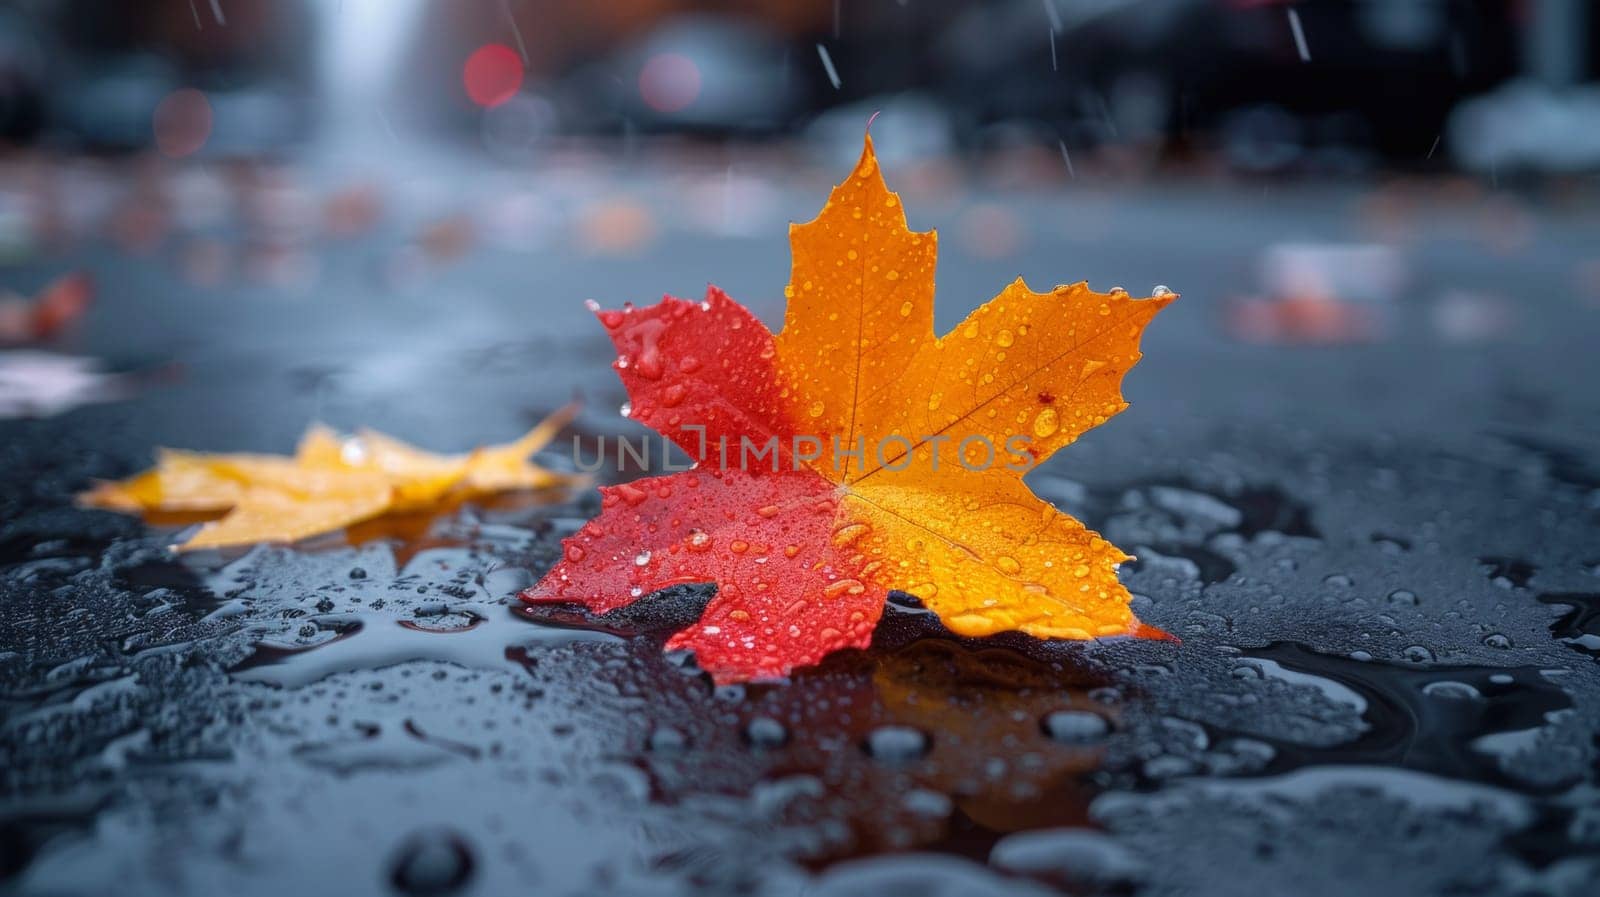 A red and yellow leaf sitting on a wet street with rain drops